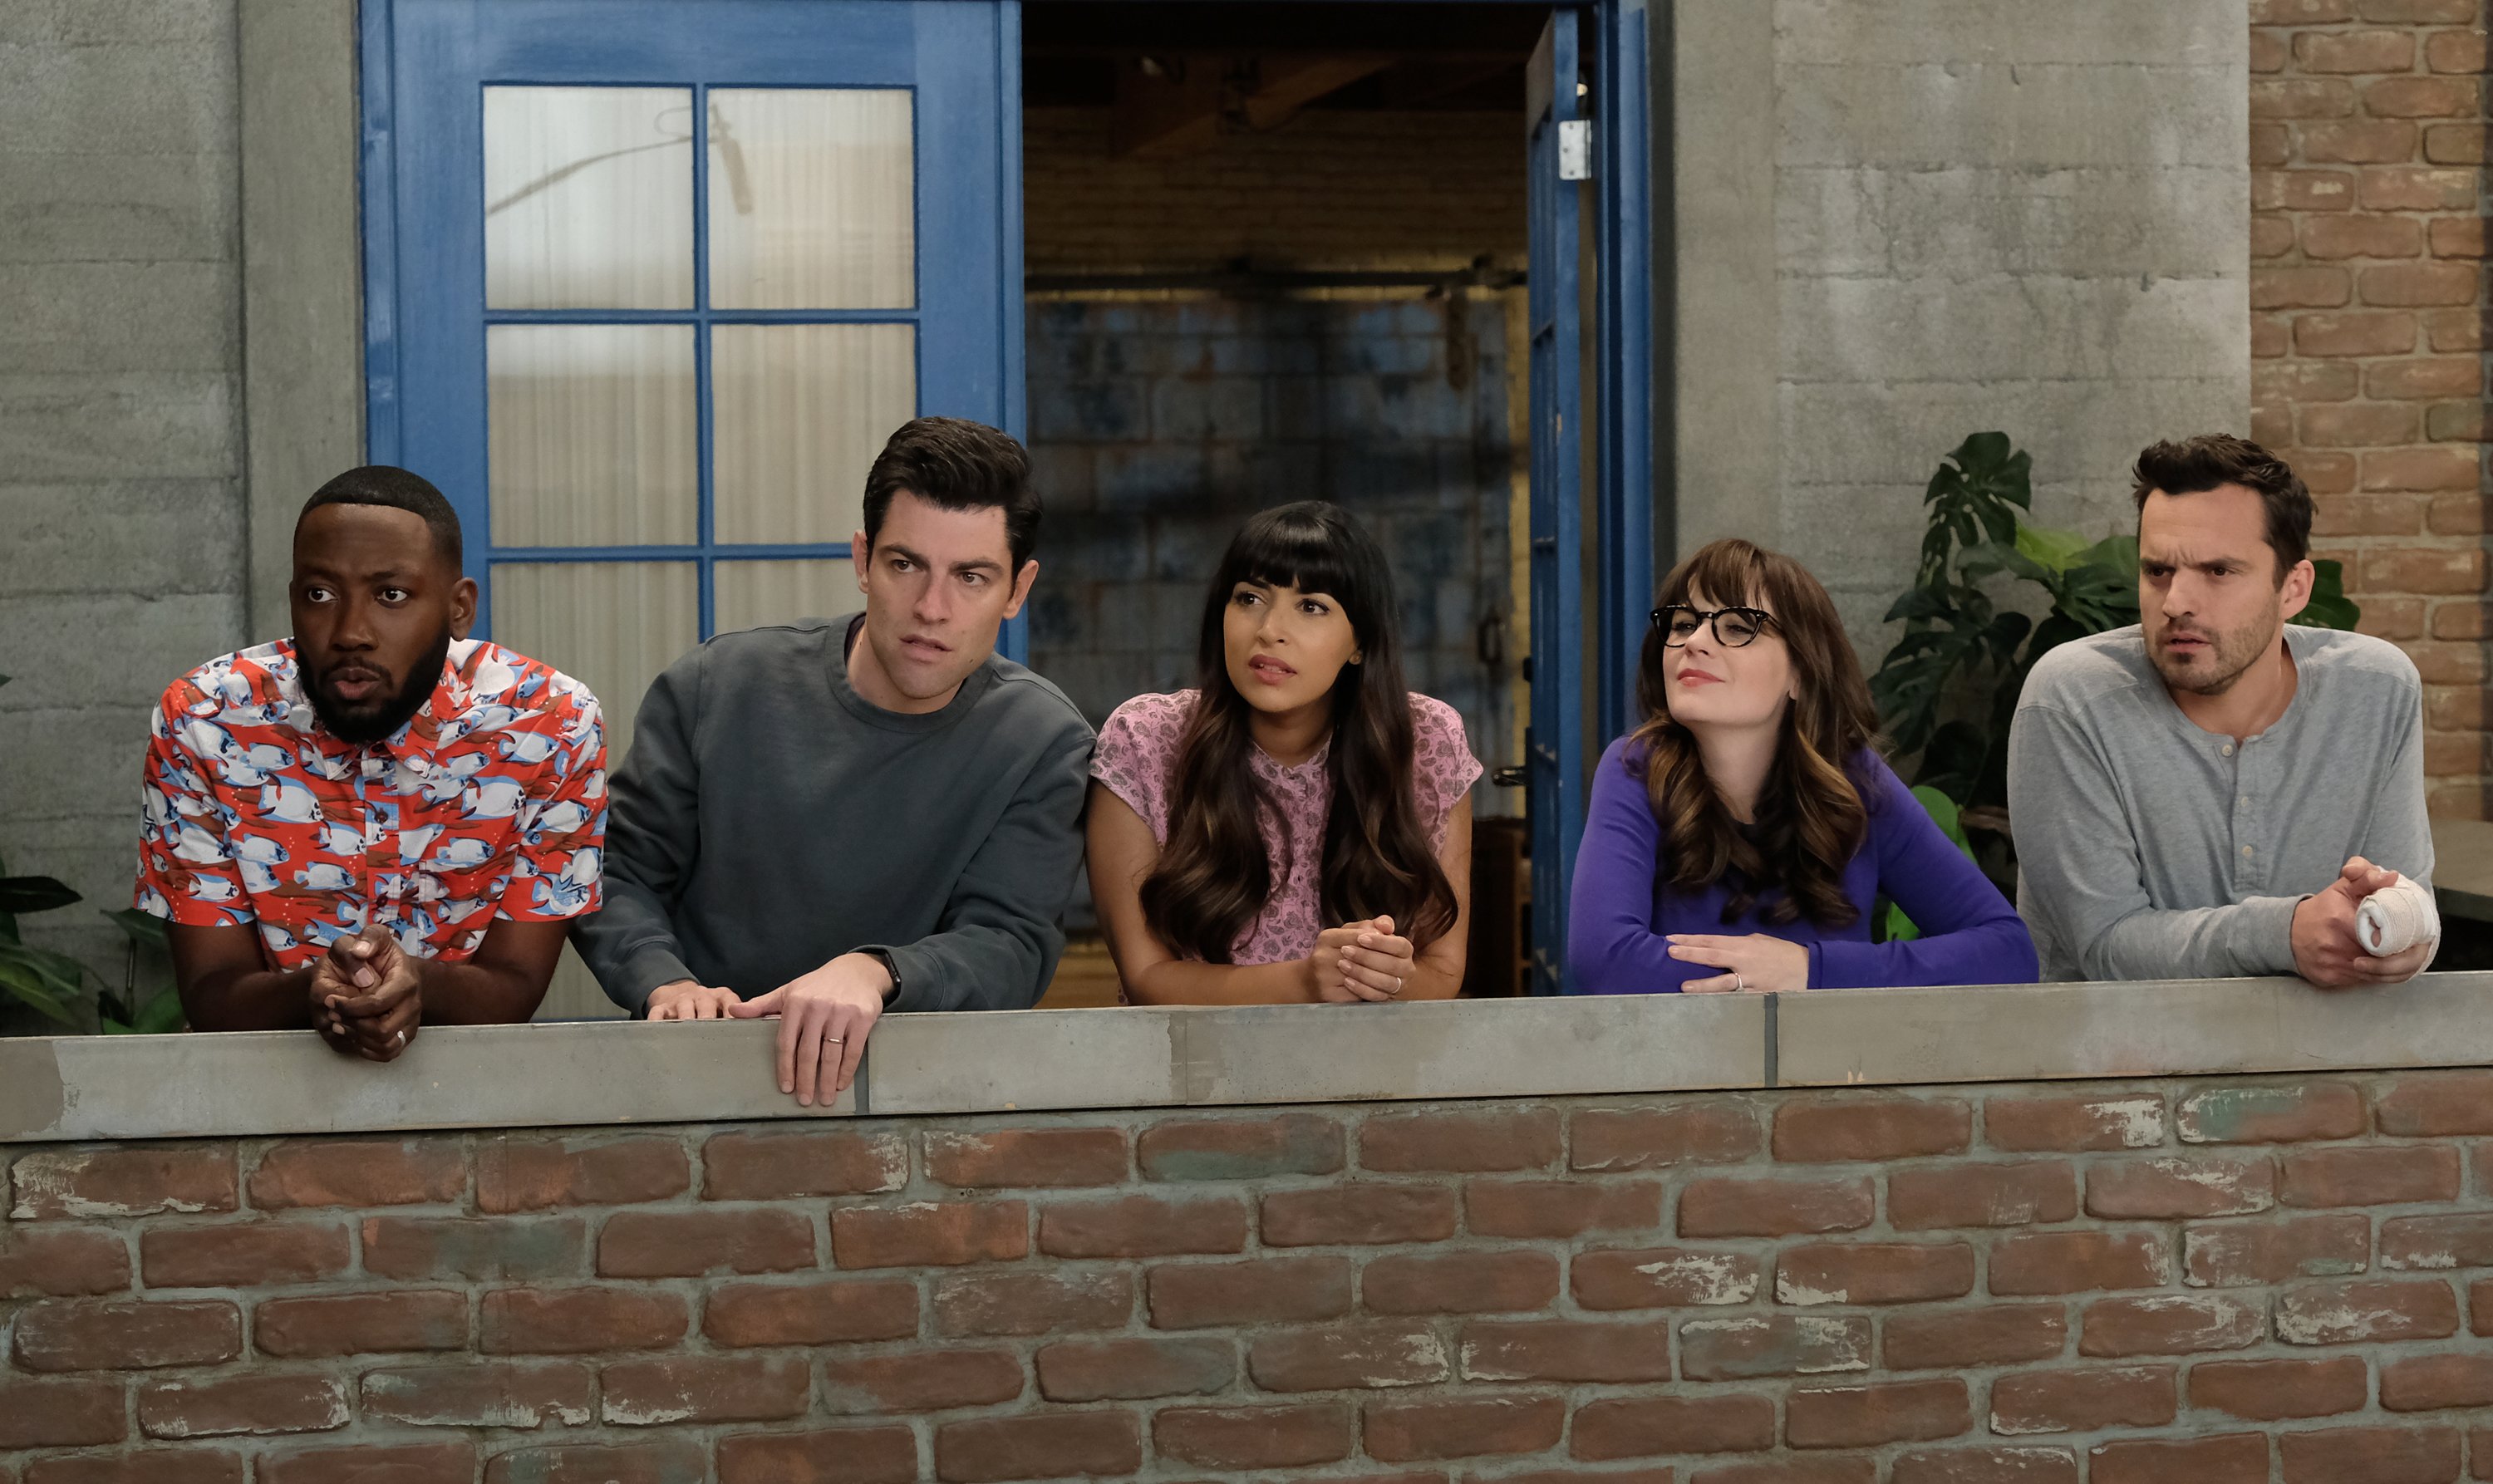 Lamorne Morris as Winston Bishop, Max Greenfield as Schmidt, Hannah Simone as Cece Parekh, Zooey Deschanel as Jessica Day and Jake Johnson as Nick Miller